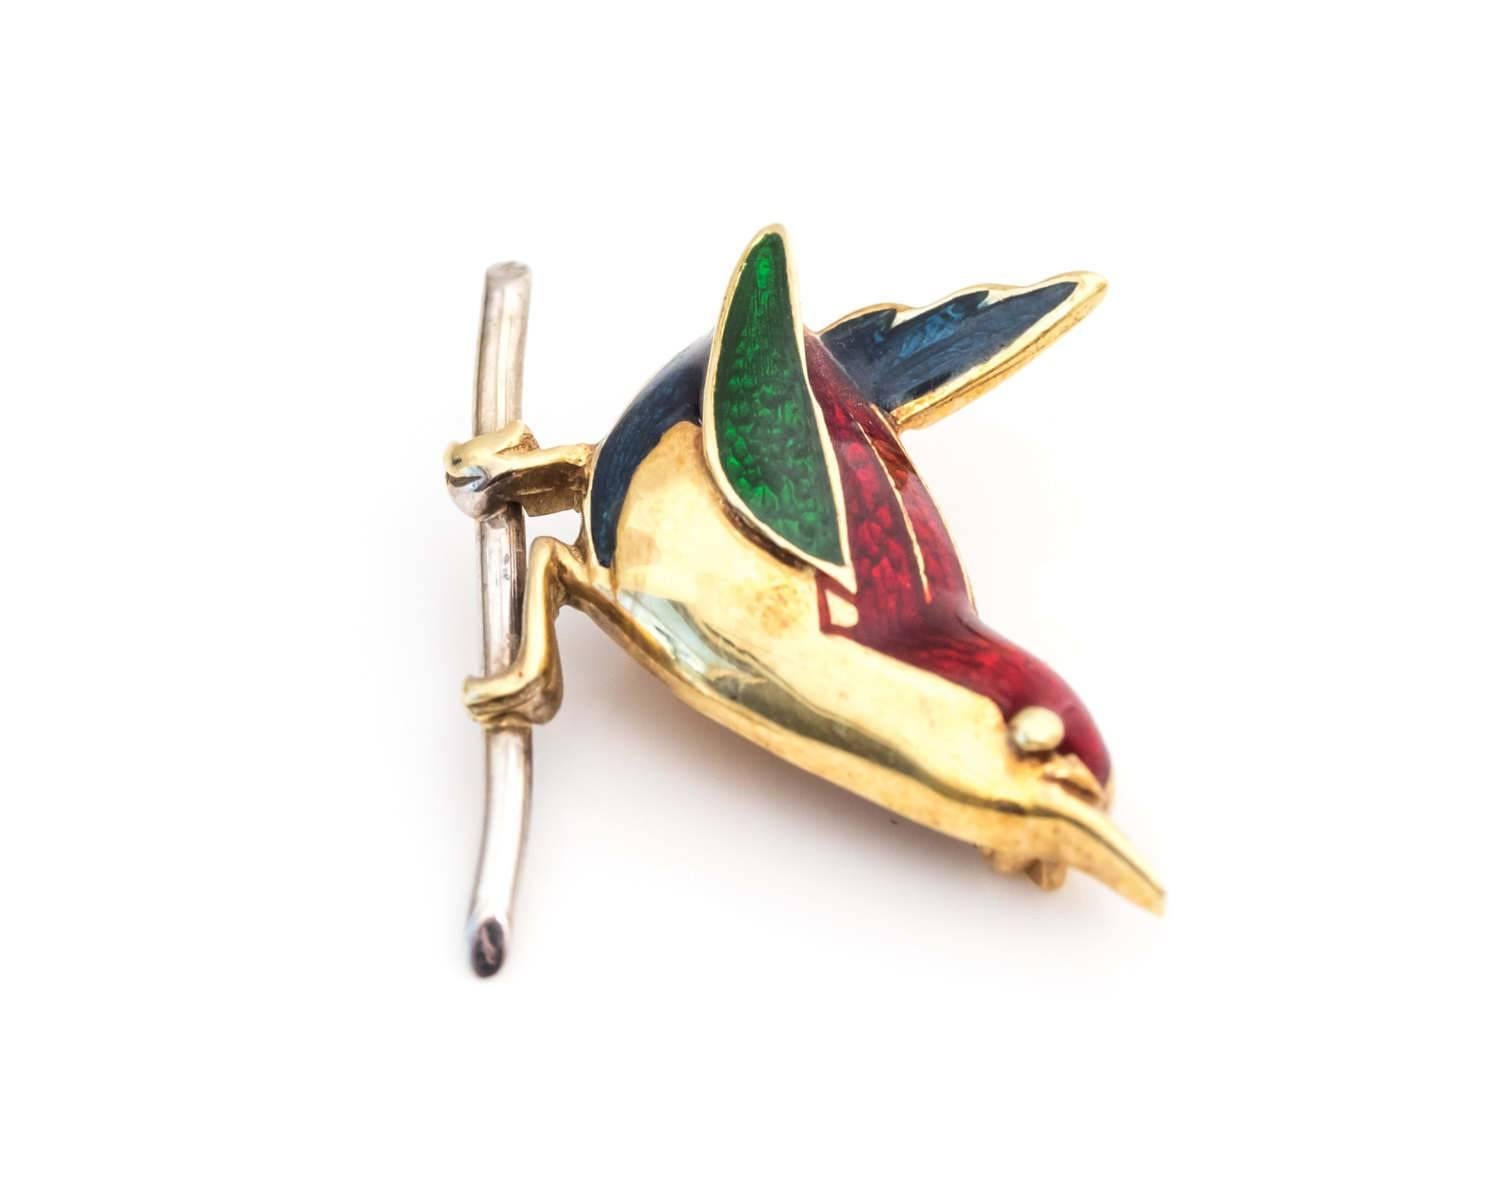 Simple Exquisite Pin with Assortment of Colorful Enamel
Bird's Body made of 14 Karat Yellow Gold
Branch on which the Bird is Perched is 14 Karat White Gold
Vibrant Enamel Decorated Throughout the Feathers in Red, Green and Blue
Enamel has a Lustrous